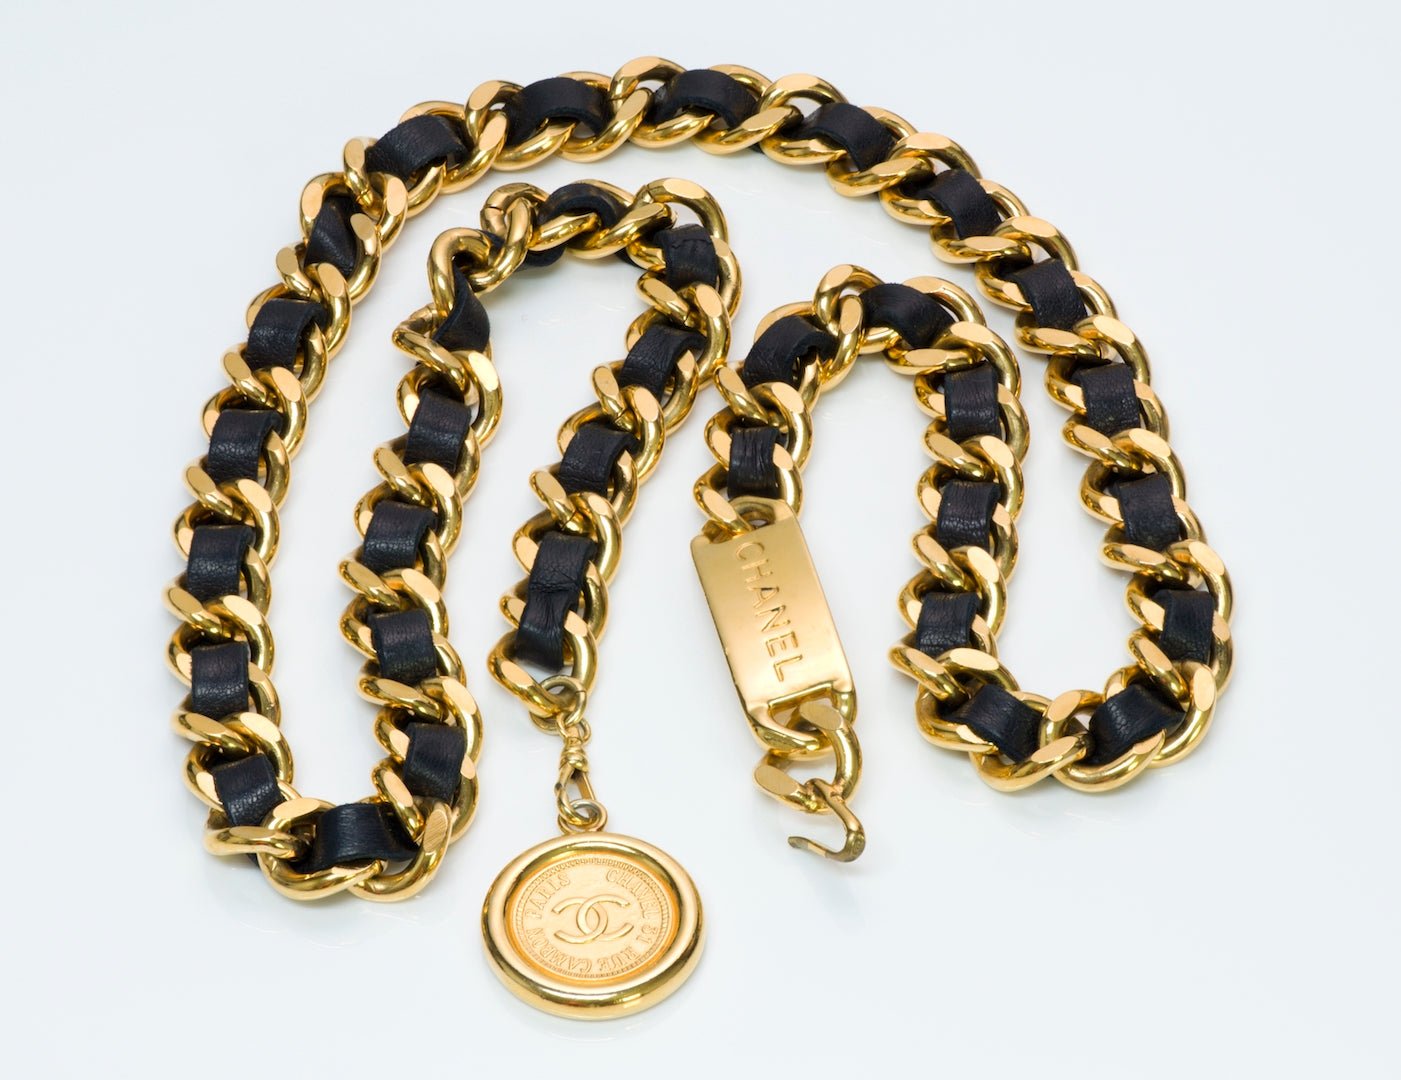 Chanel Chain Leather Belt - DSF Antique Jewelry